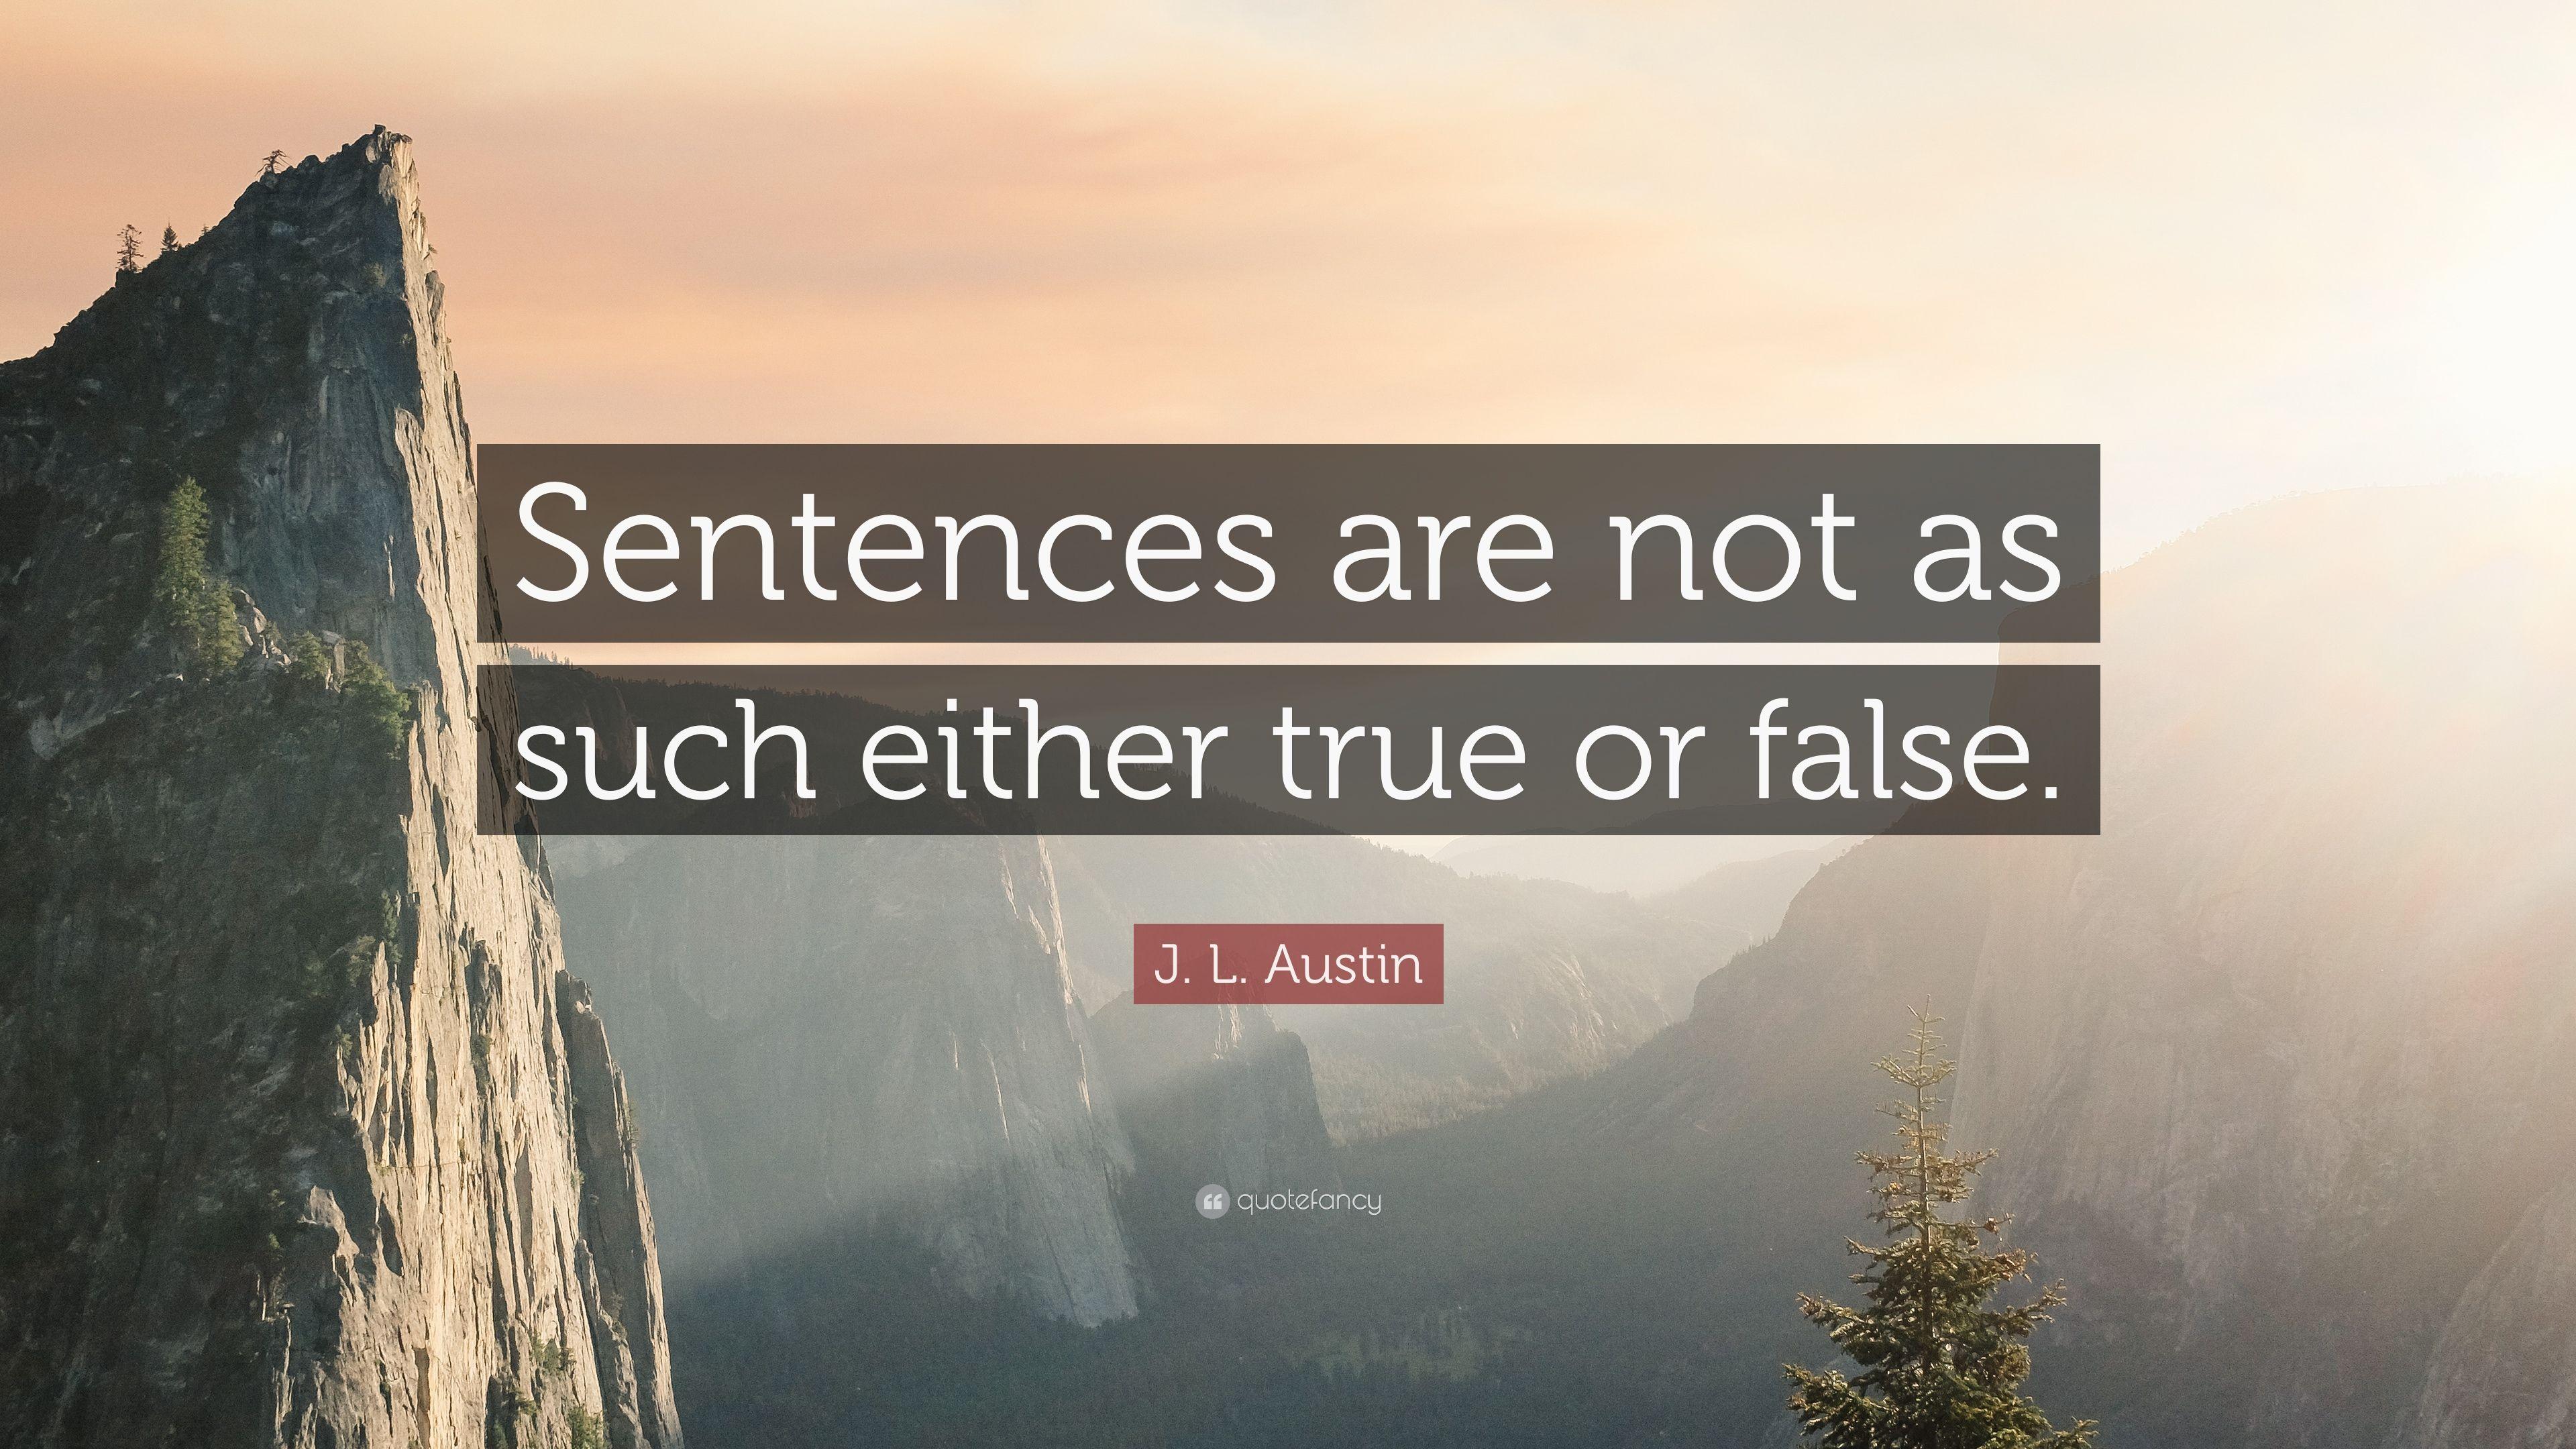 J. L. Austin Quote: “Sentences are not as such either true or false